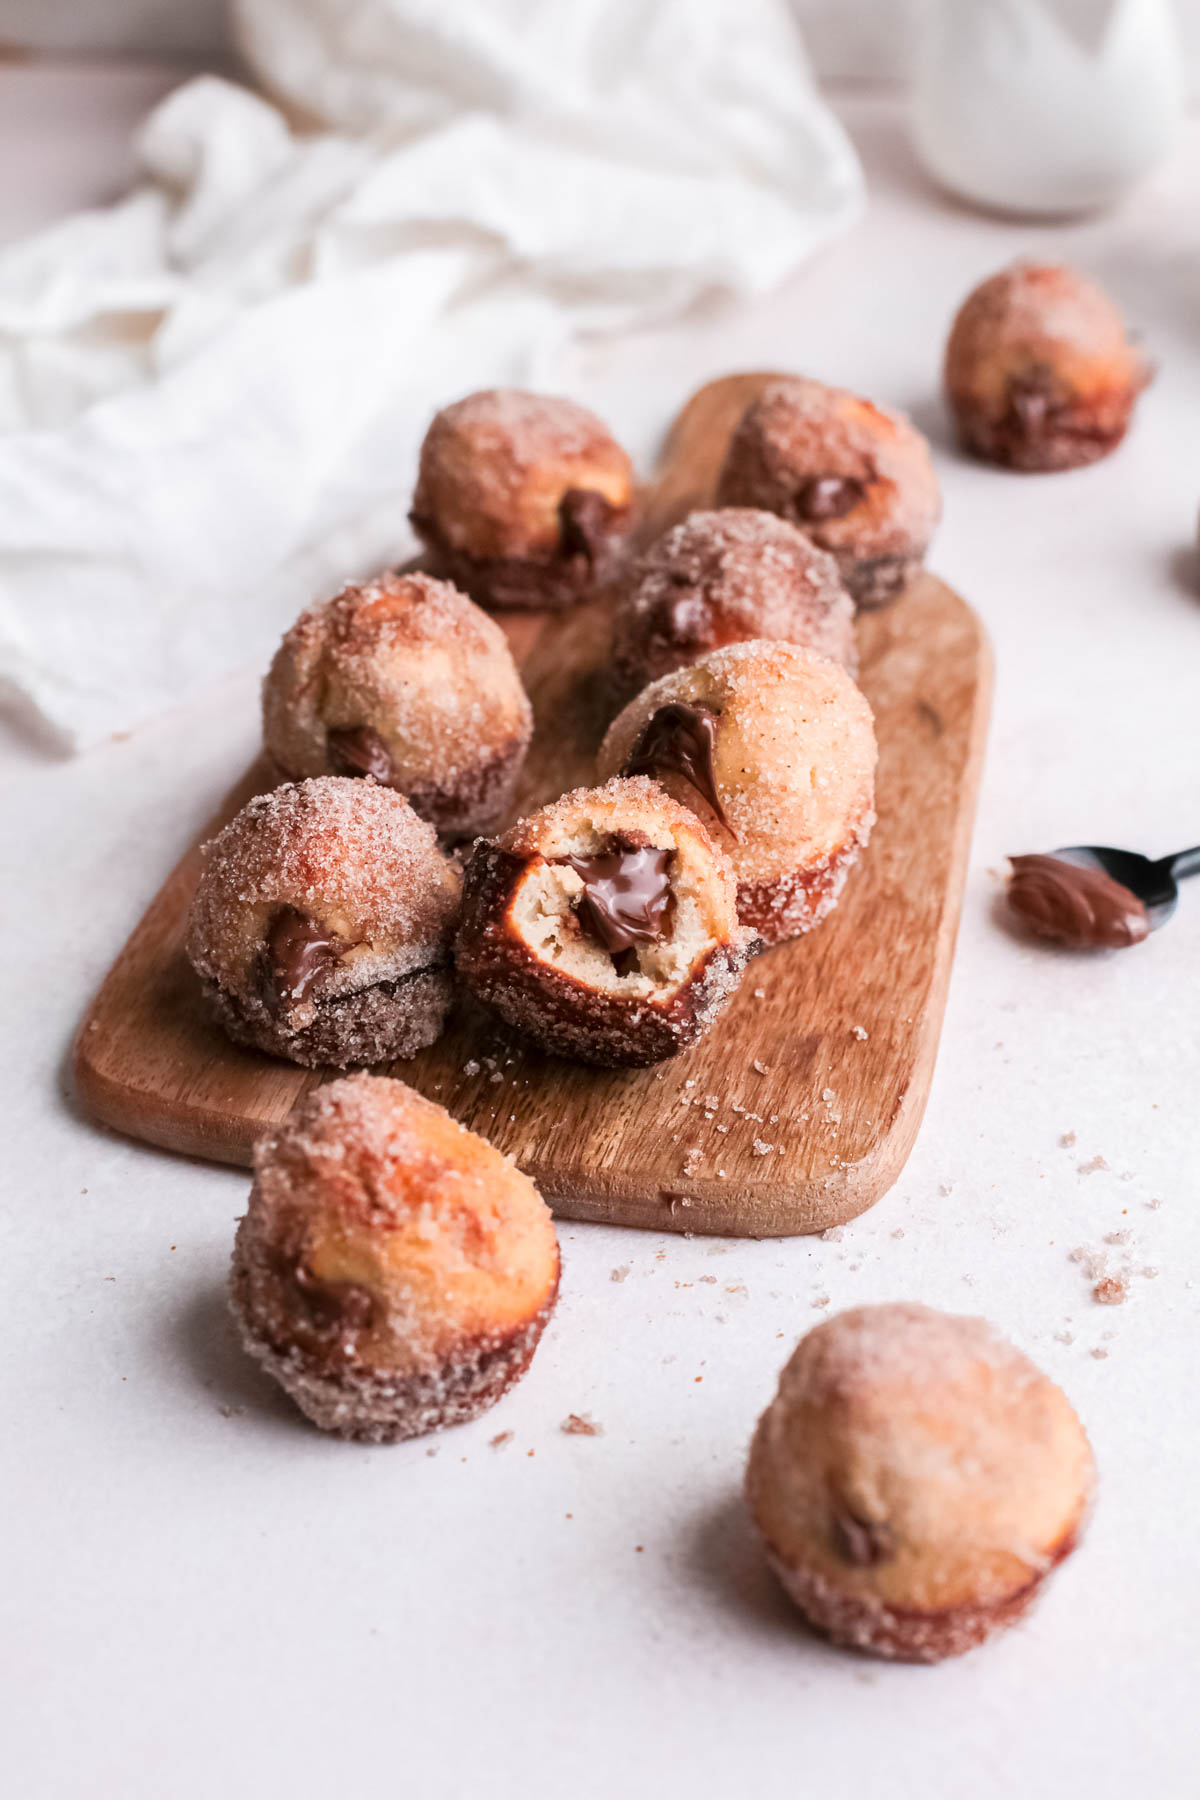 Nutella Donut Holes stacked on wooden board.